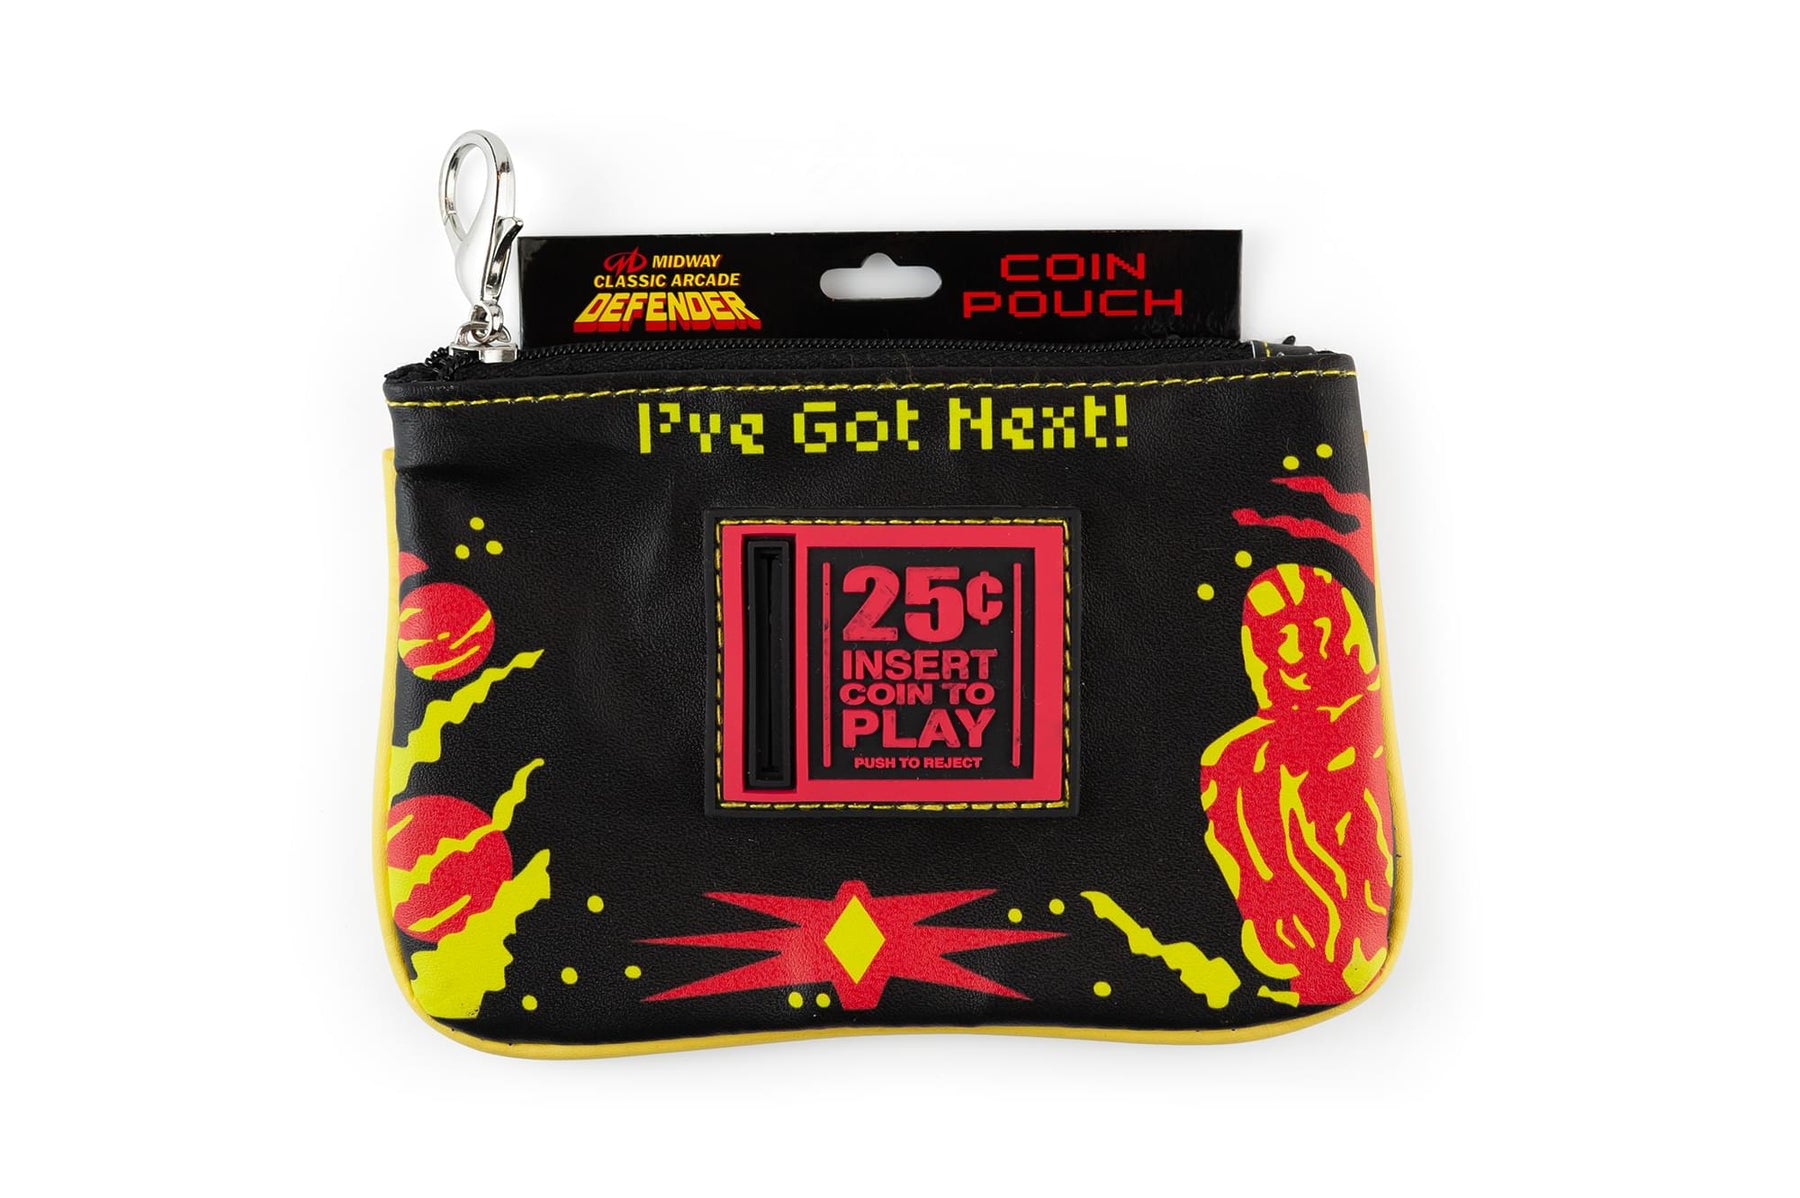 Midway Arcade Games Defender Themed Zippered Coin Purse & Mini Cash Wallet